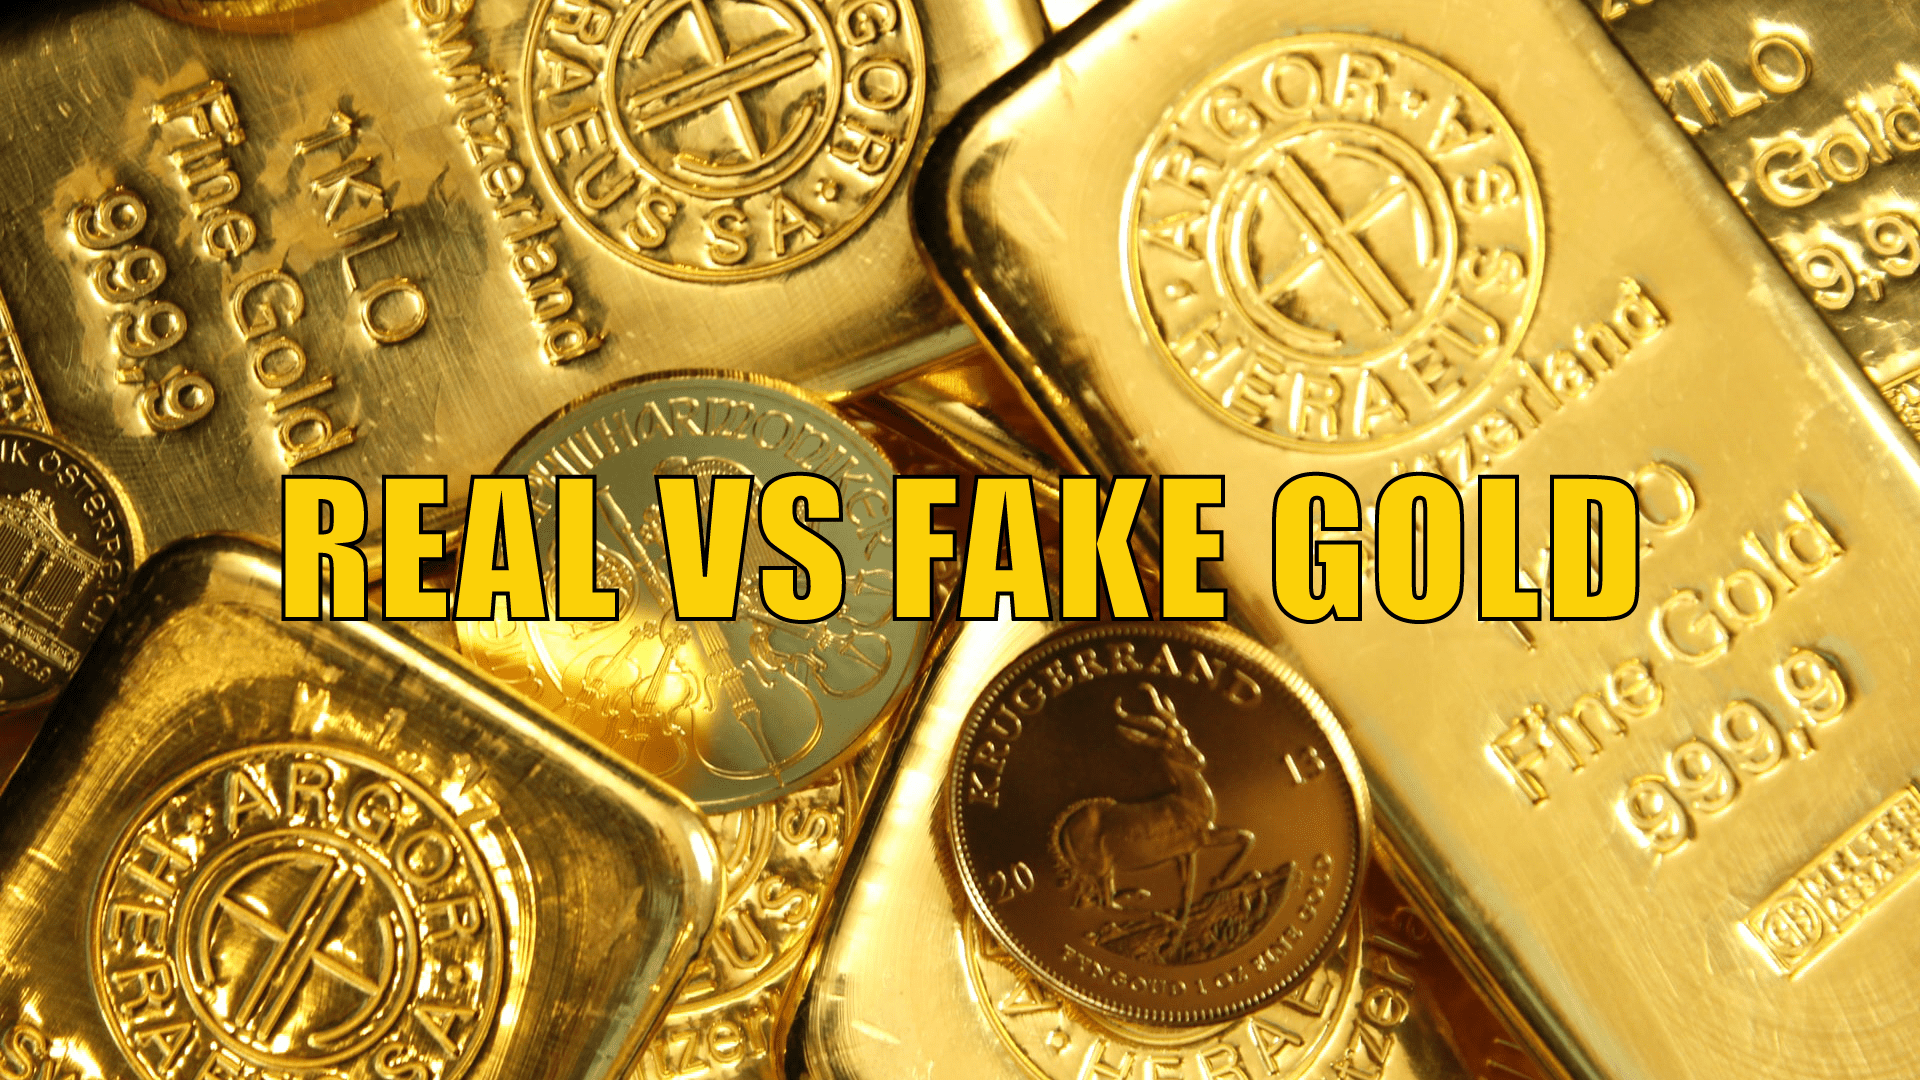 Detecting fake gold coins  Gold coin forgery, counterfeit detection tips